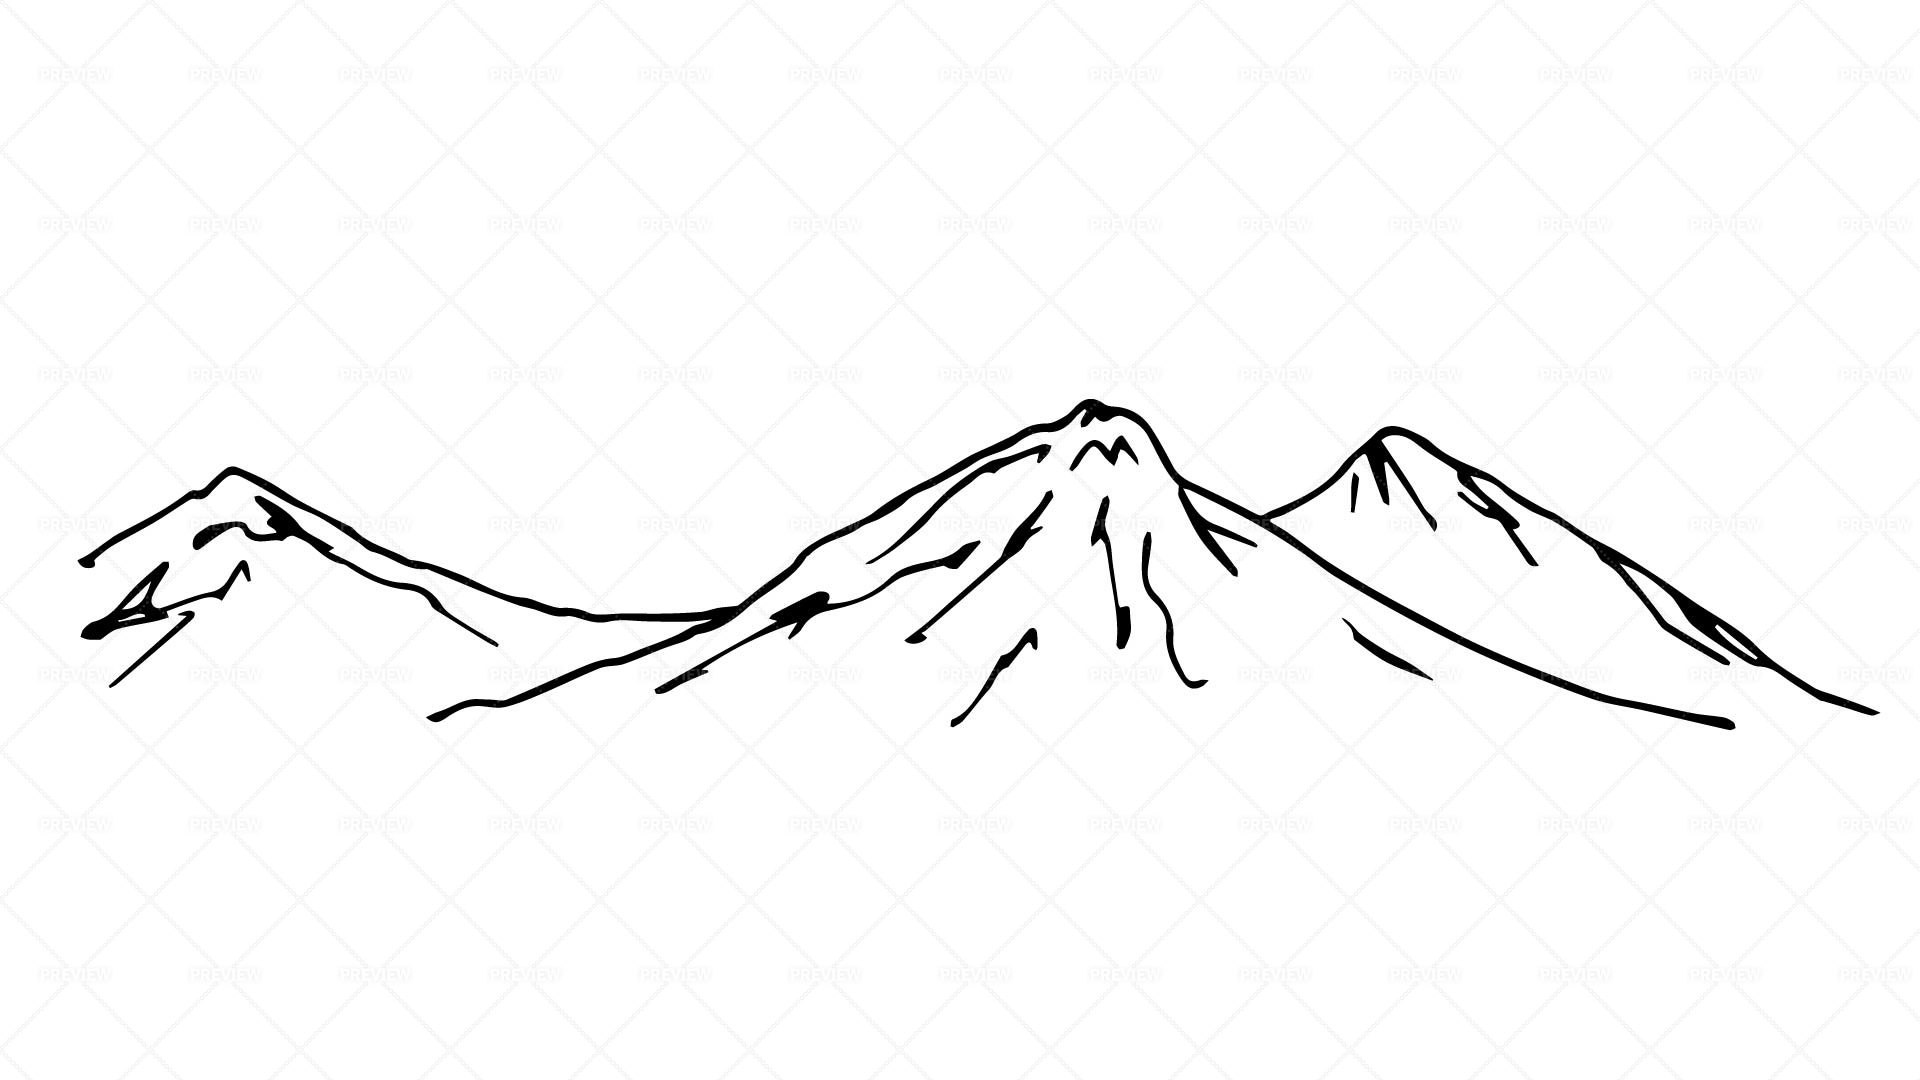 How to Draw Mountains Easy Step by Step Tutorial